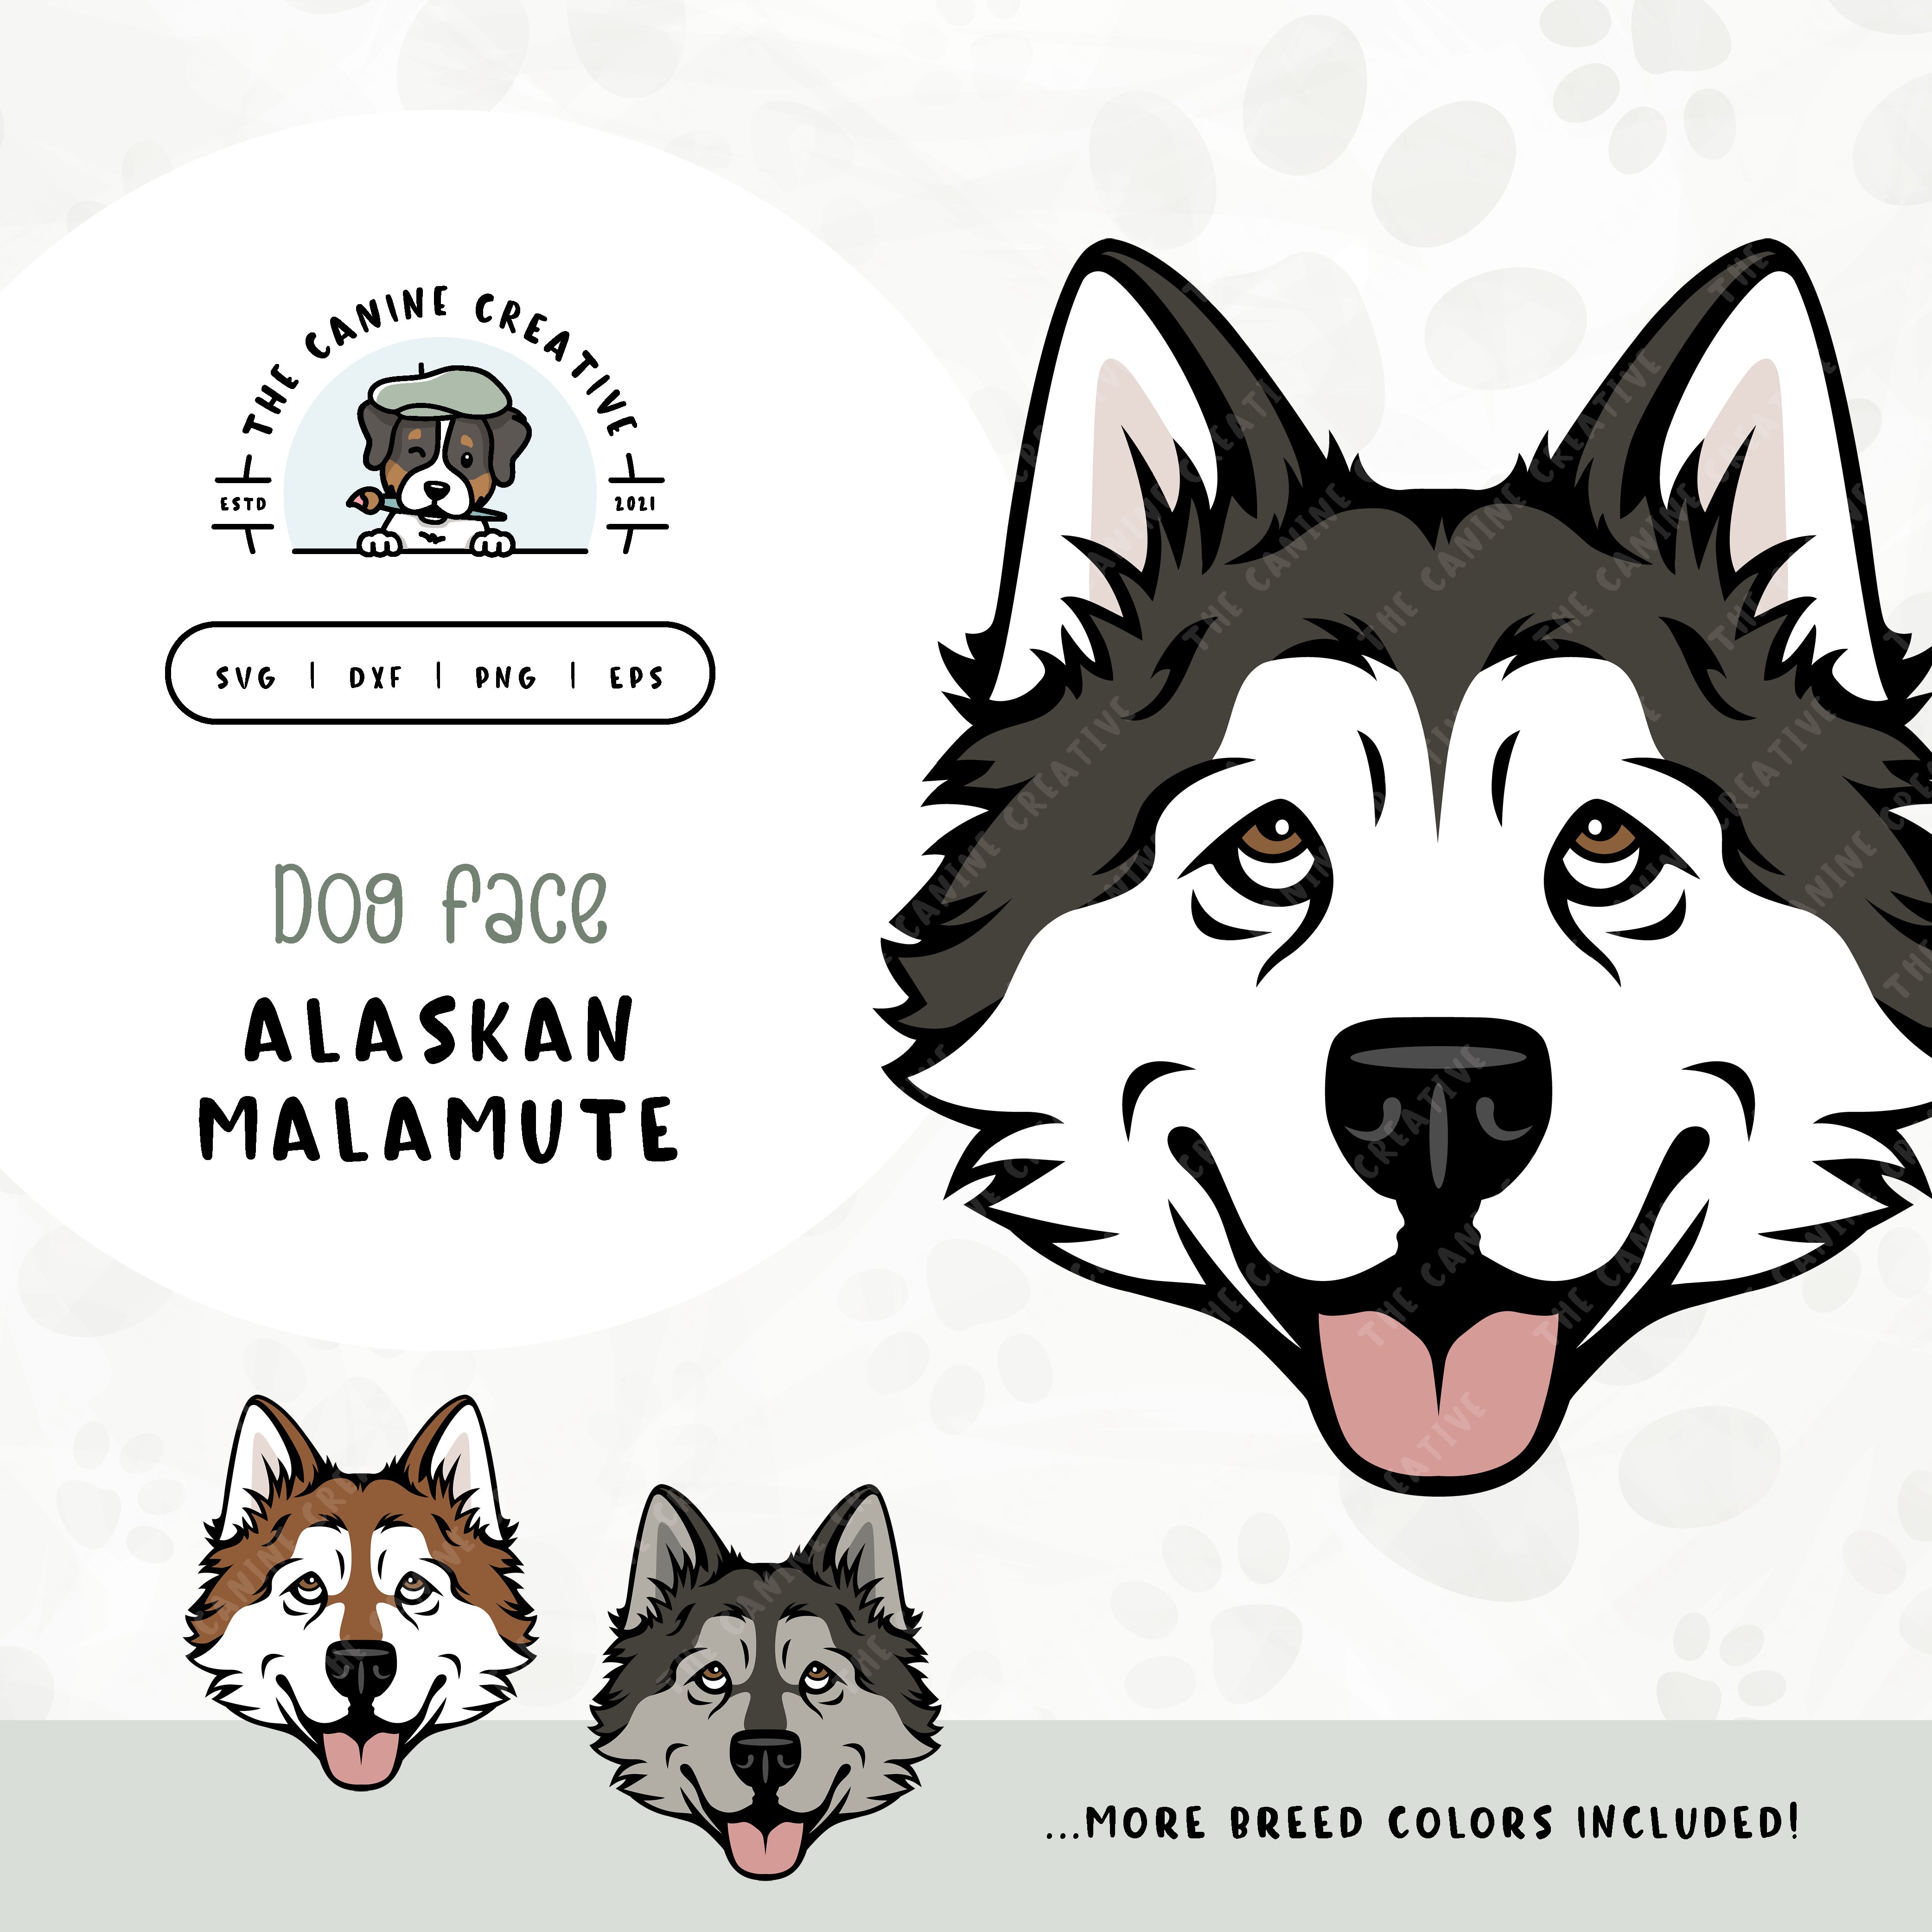 This illustrated design features an Alaskan Malamute face. File formats include: SVG, DXF, PNG, and EPS.